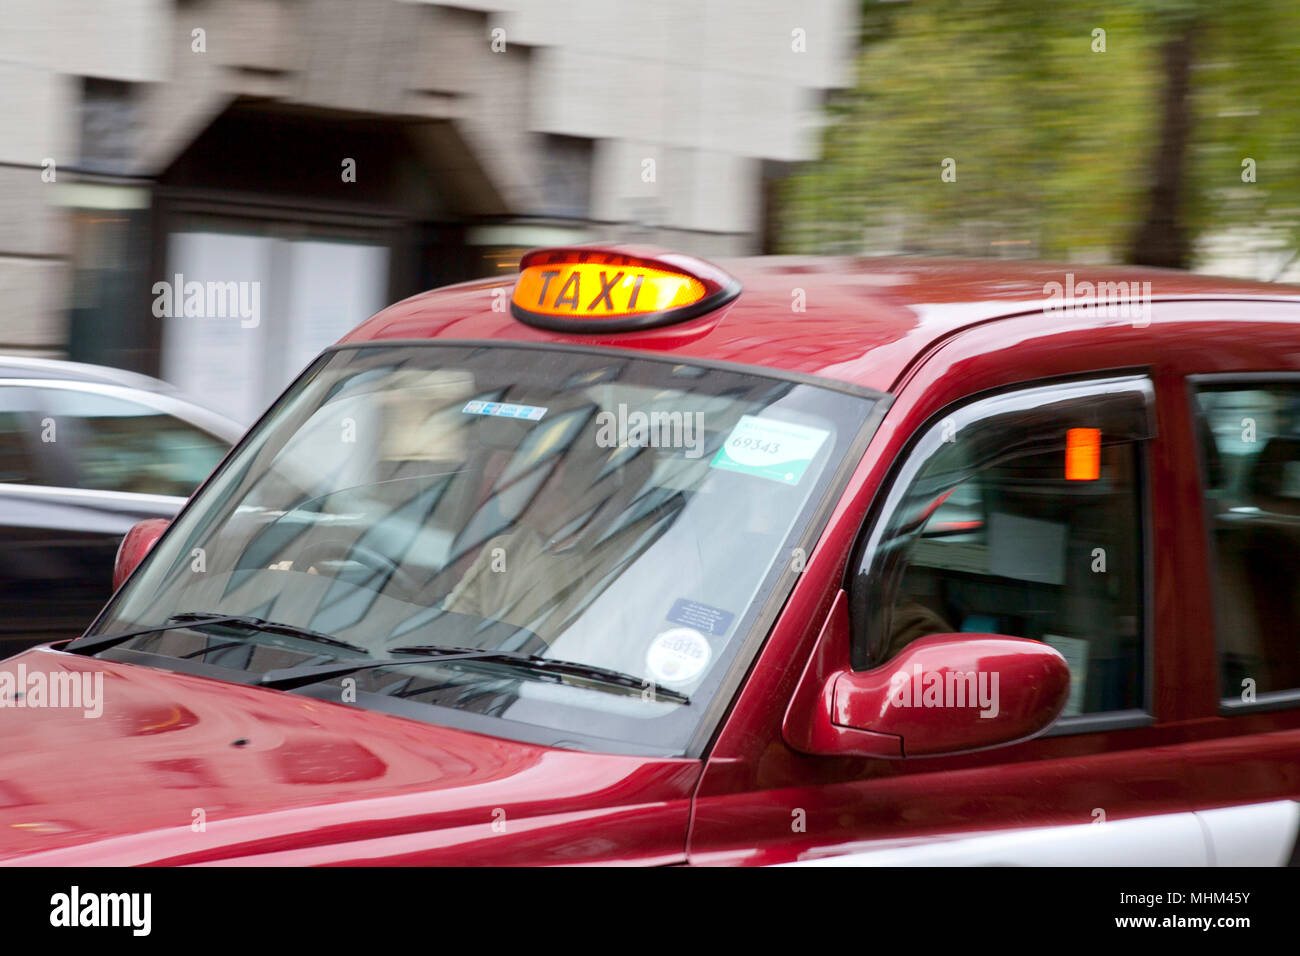 London taxi cab speeding through London with for hire light on with blurred back ground Stock Photo